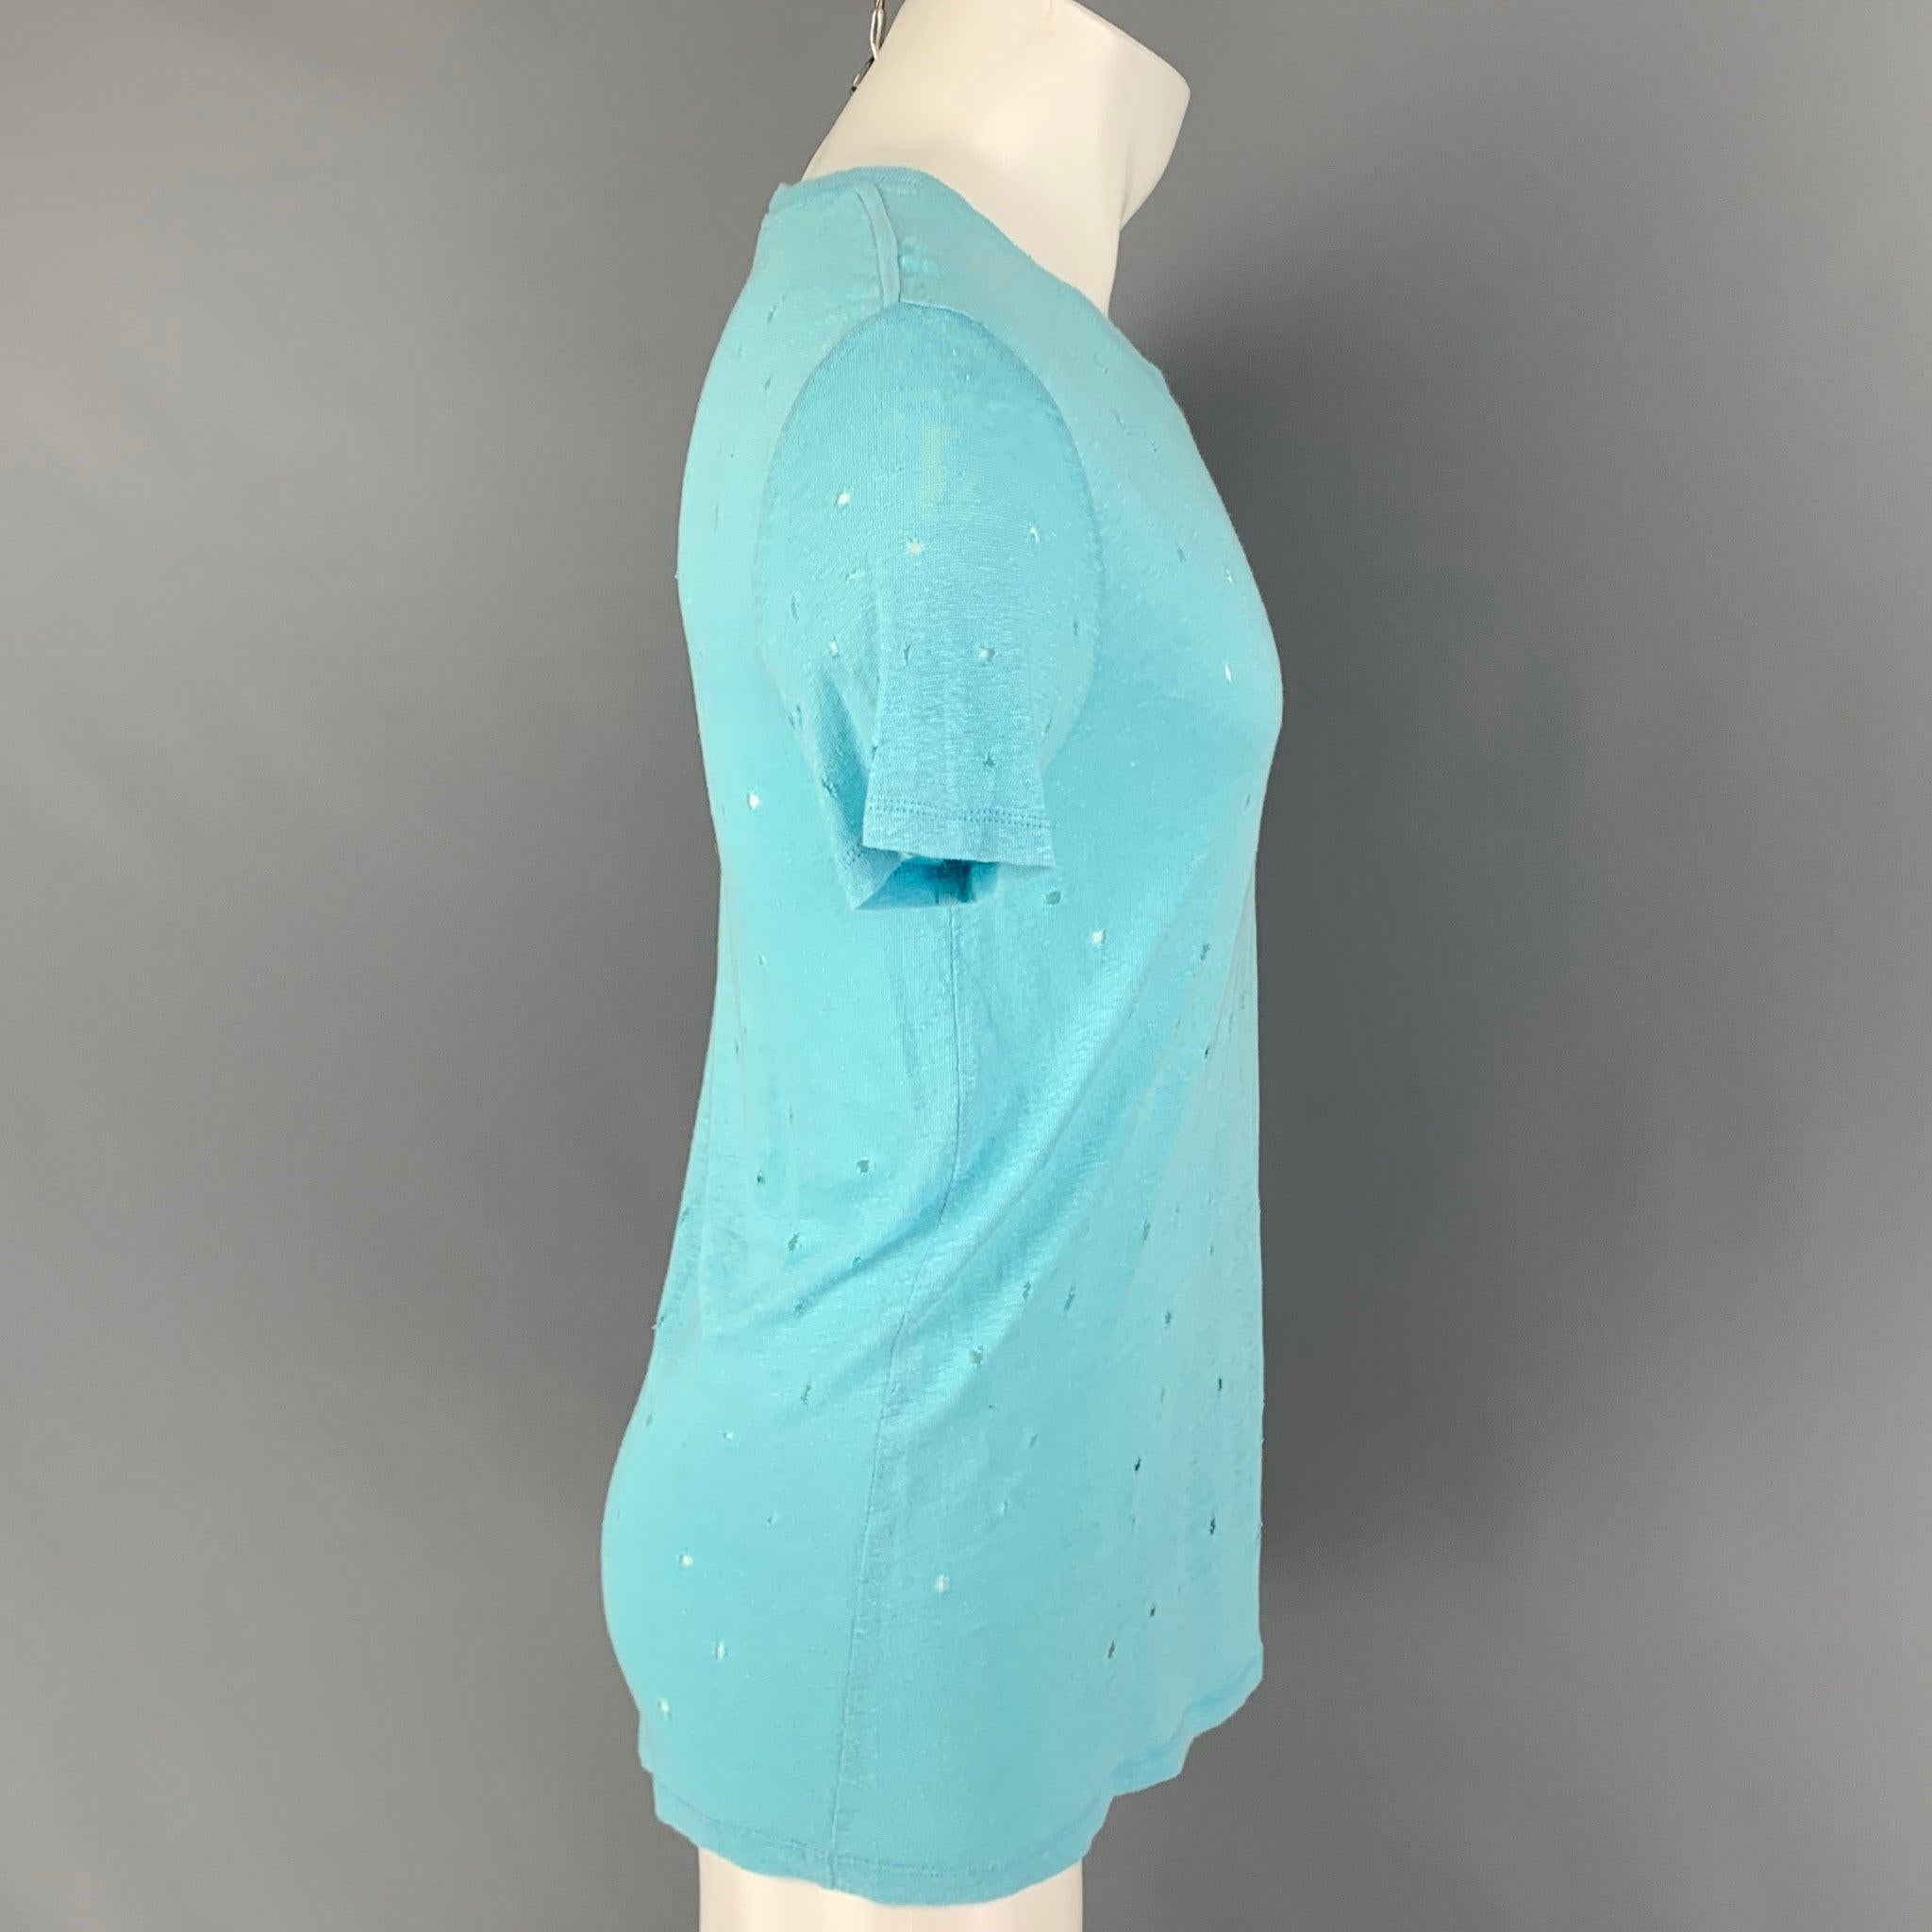 IRO 'Clay' t-shirt comes in a light blue linen featuring distressed details throughout and a crew-neck. Made in Portugal.
Very Good Pre-Owned Condition.  

Marked:   XS 

Measurements: 
 
Shoulder: 17 inches  Chest: 36 inches  Sleeve: 7.5 inches